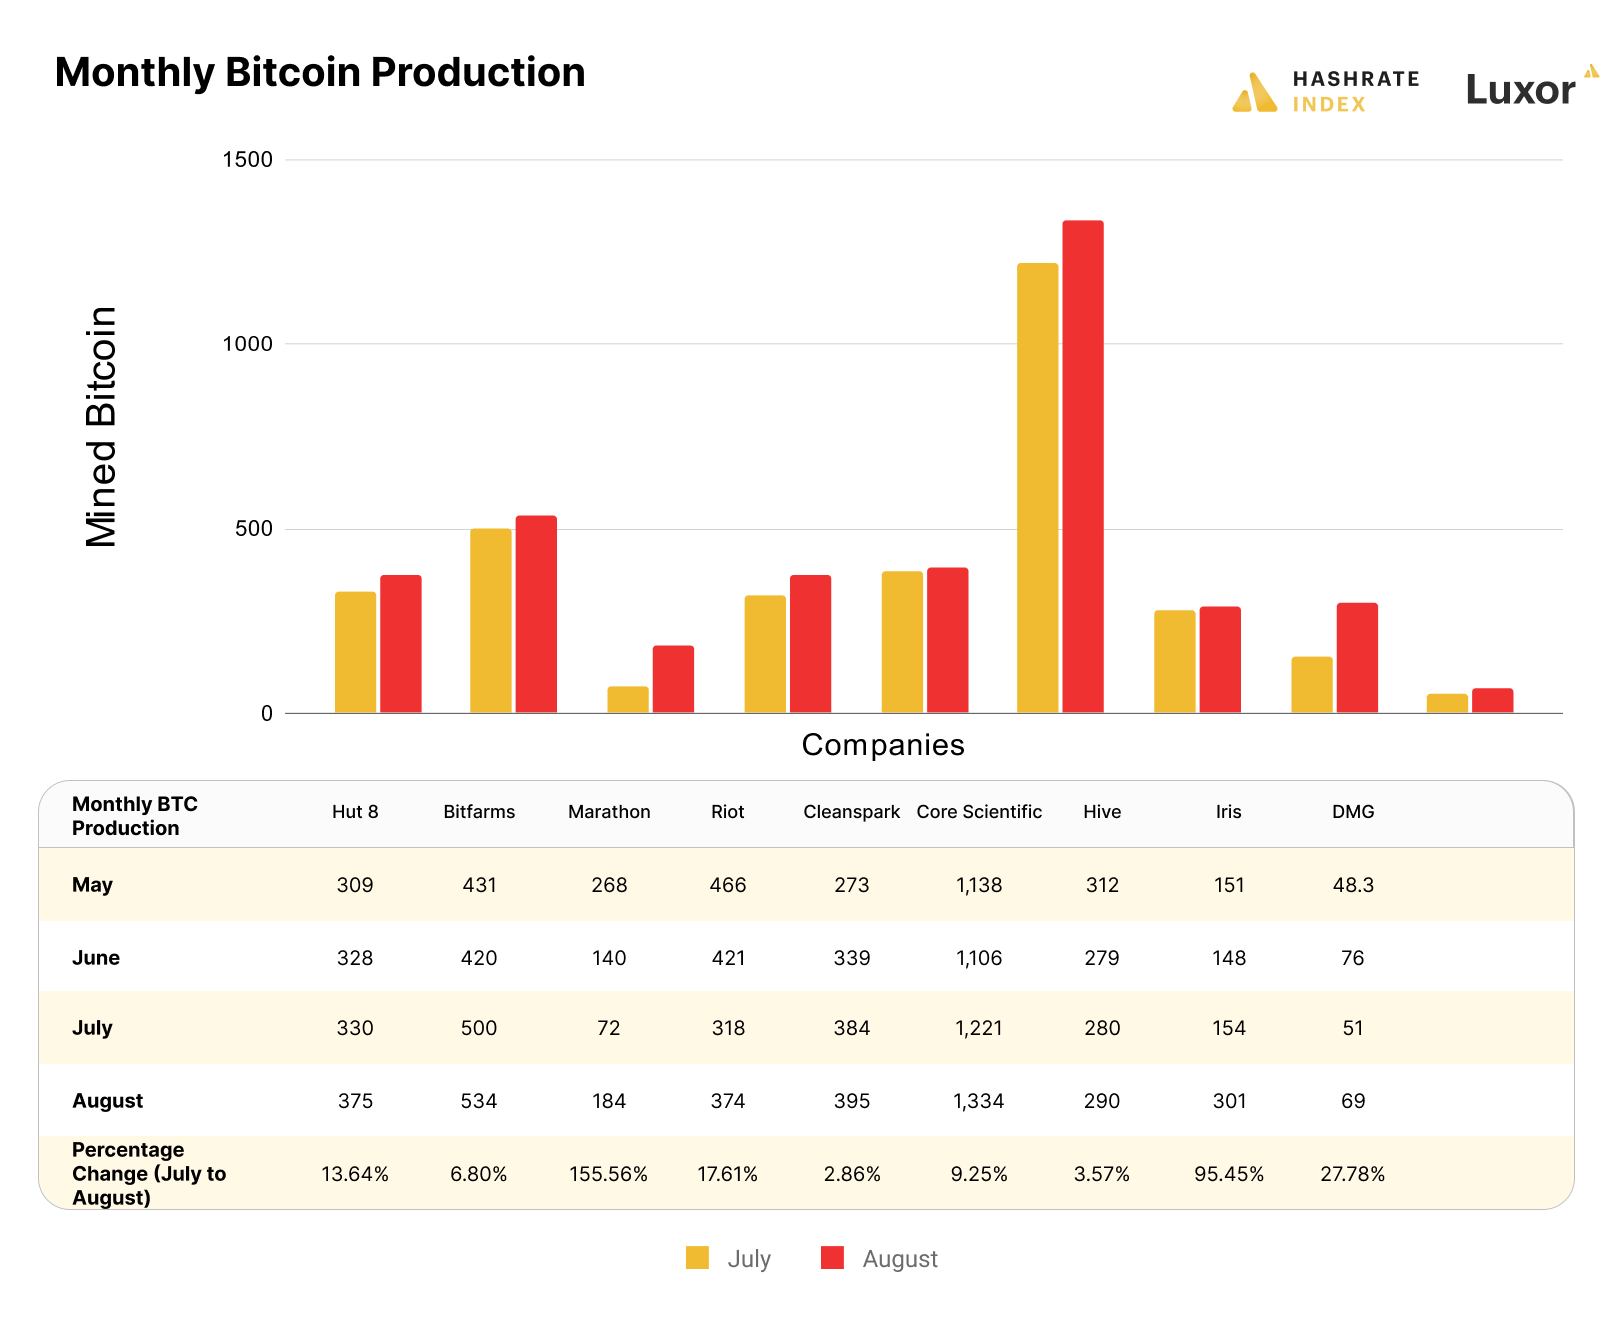 Bitcoin mining stock monthly BTC production | Source: public disclosures